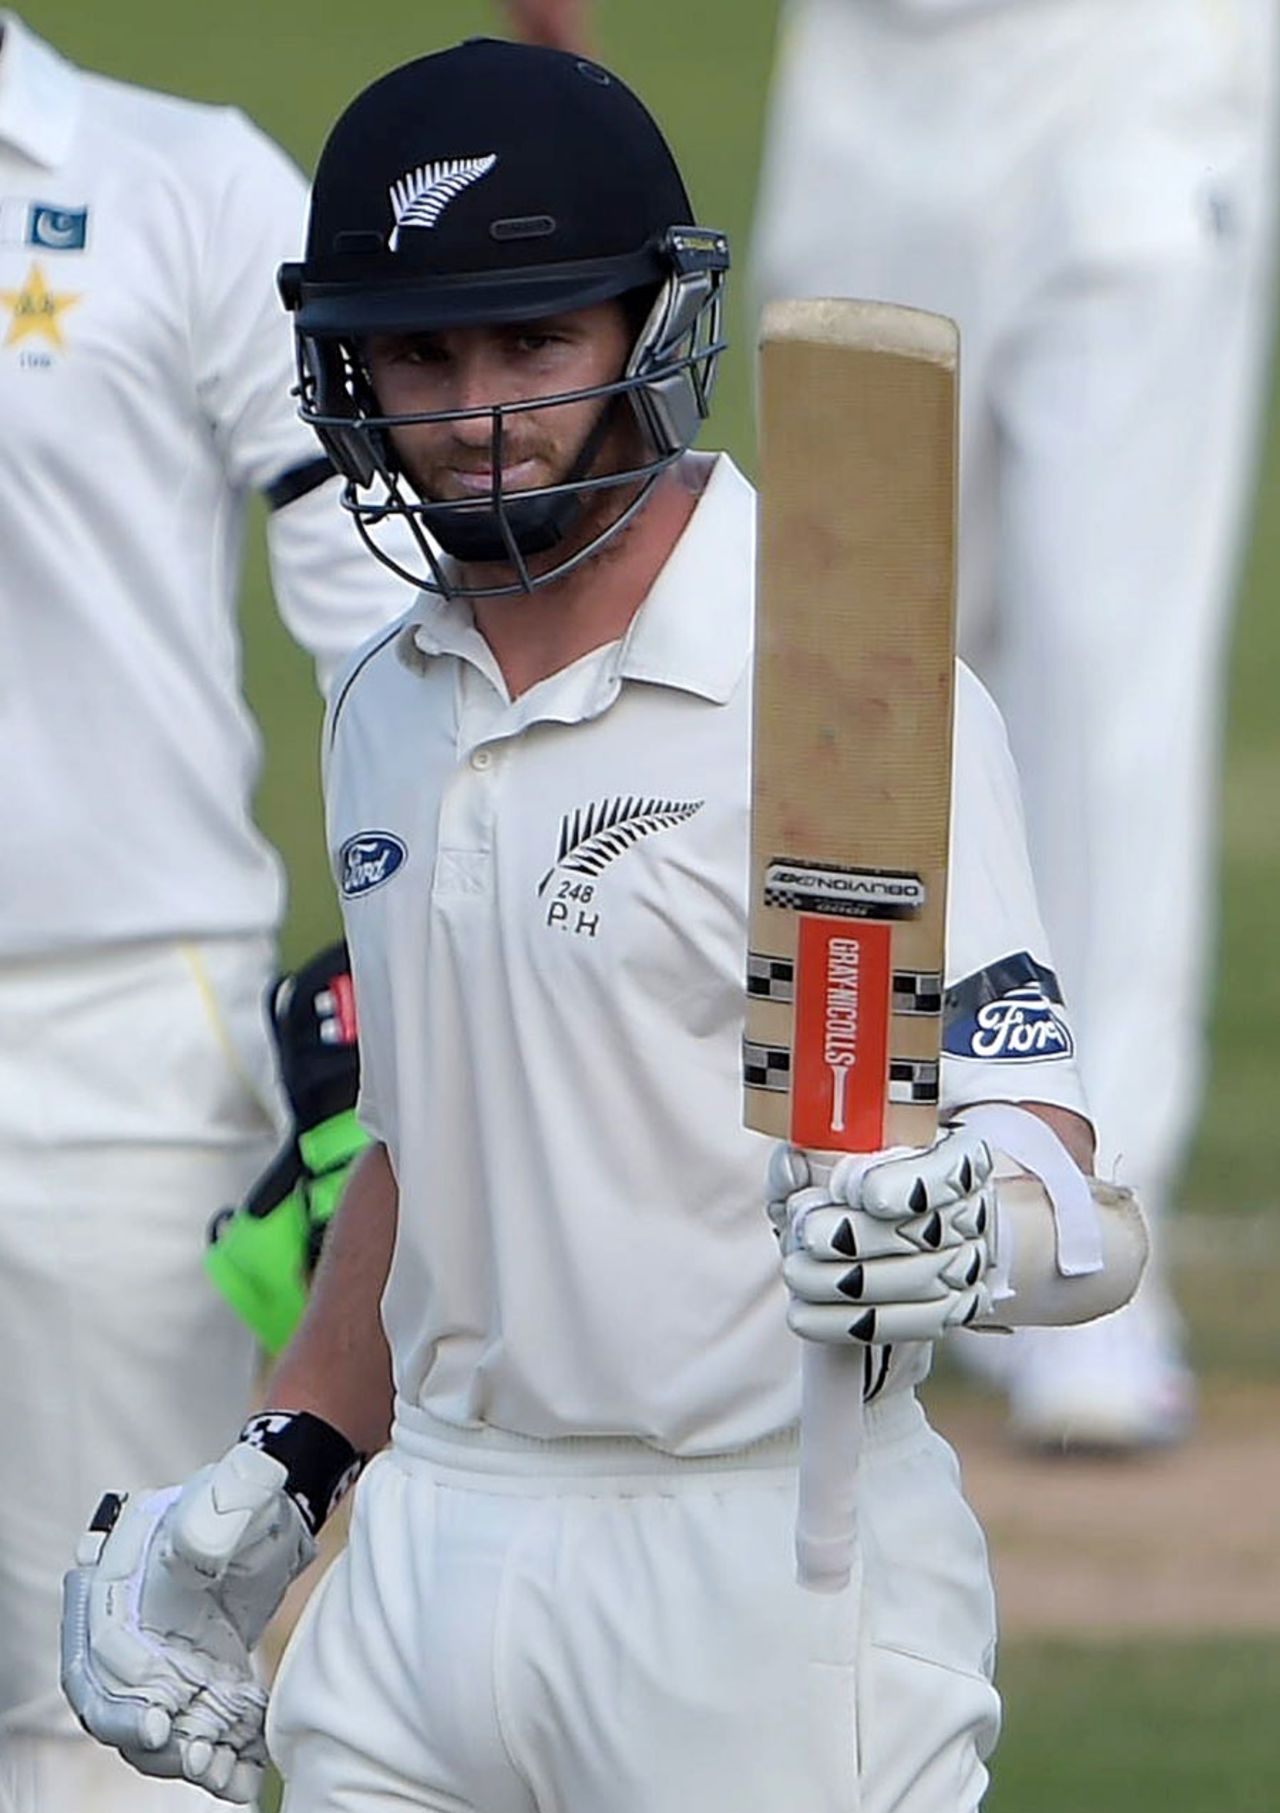 Kane Williamson quietly acknowledges the applause for his eighth Test century, Pakistan v New Zealand, 3rd Test, Sharjah, 3rd day, November 29, 2014